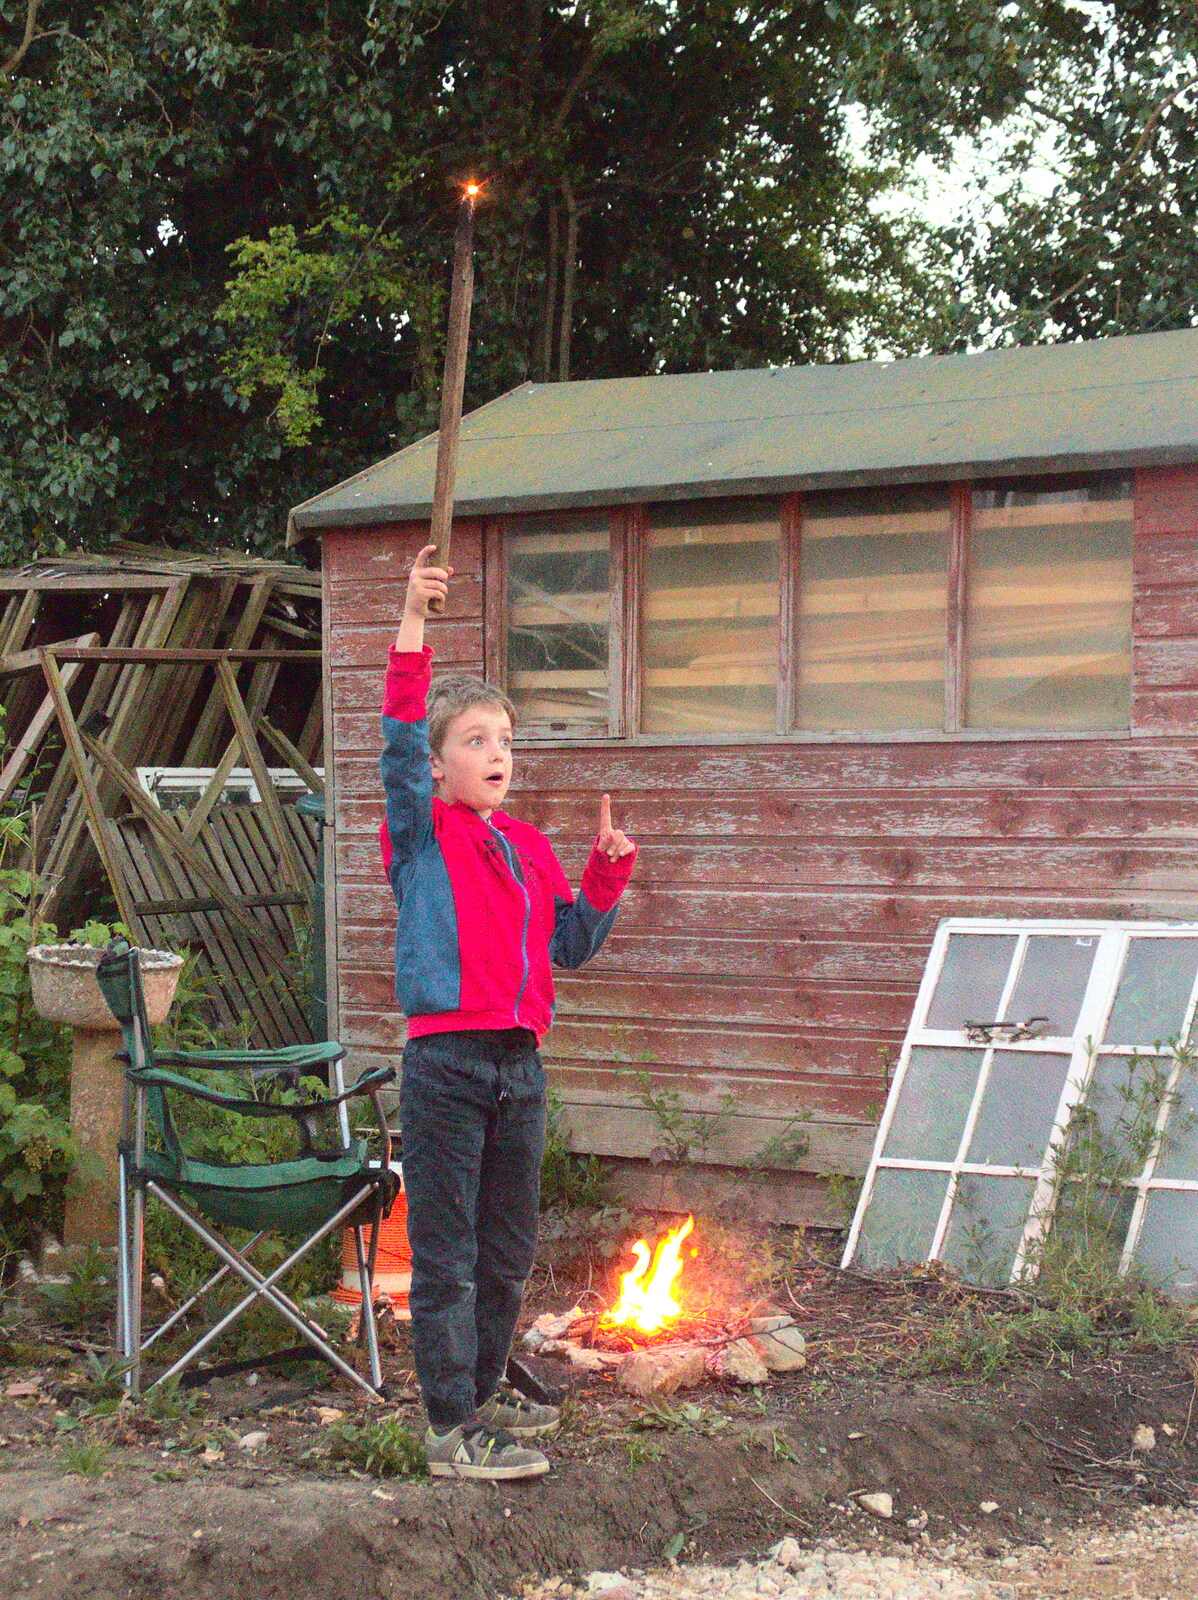 Fred waves a burning stick in the air from Campfires, Oaksmere Building and a BSCC Bike Ride, Brome, Suffolk - 4th May 2017